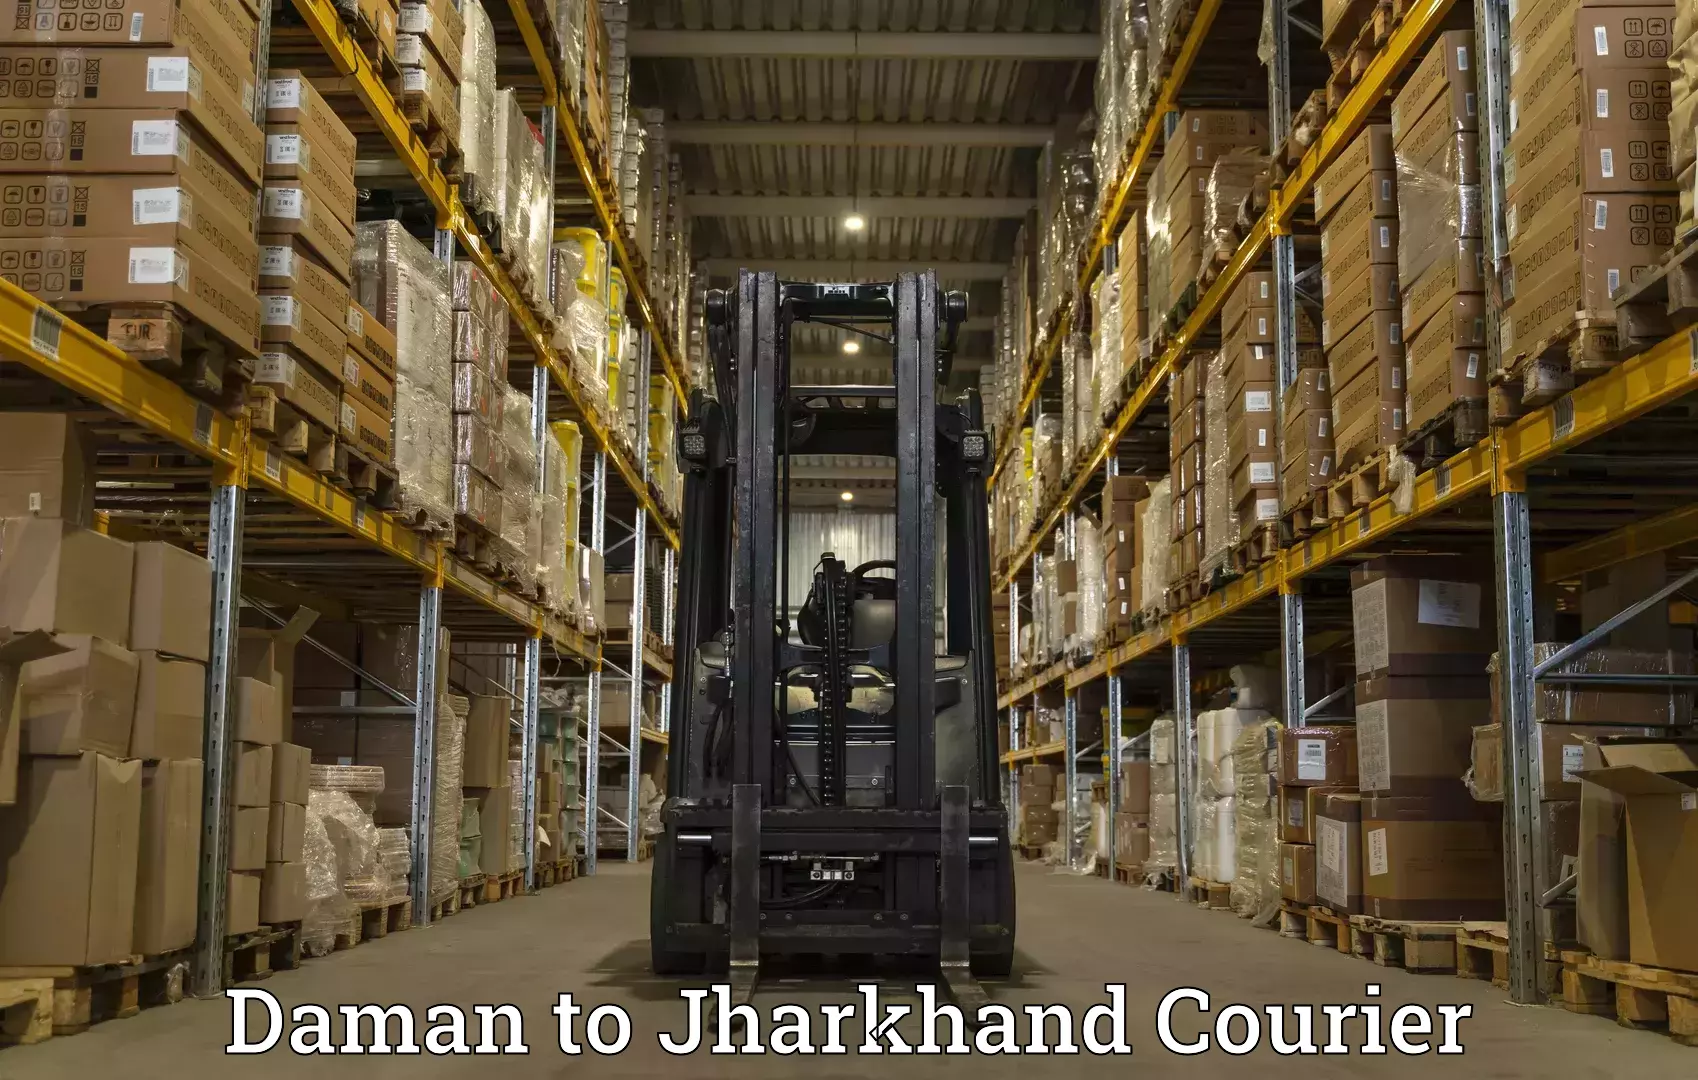 Express package handling in Daman to Jharkhand